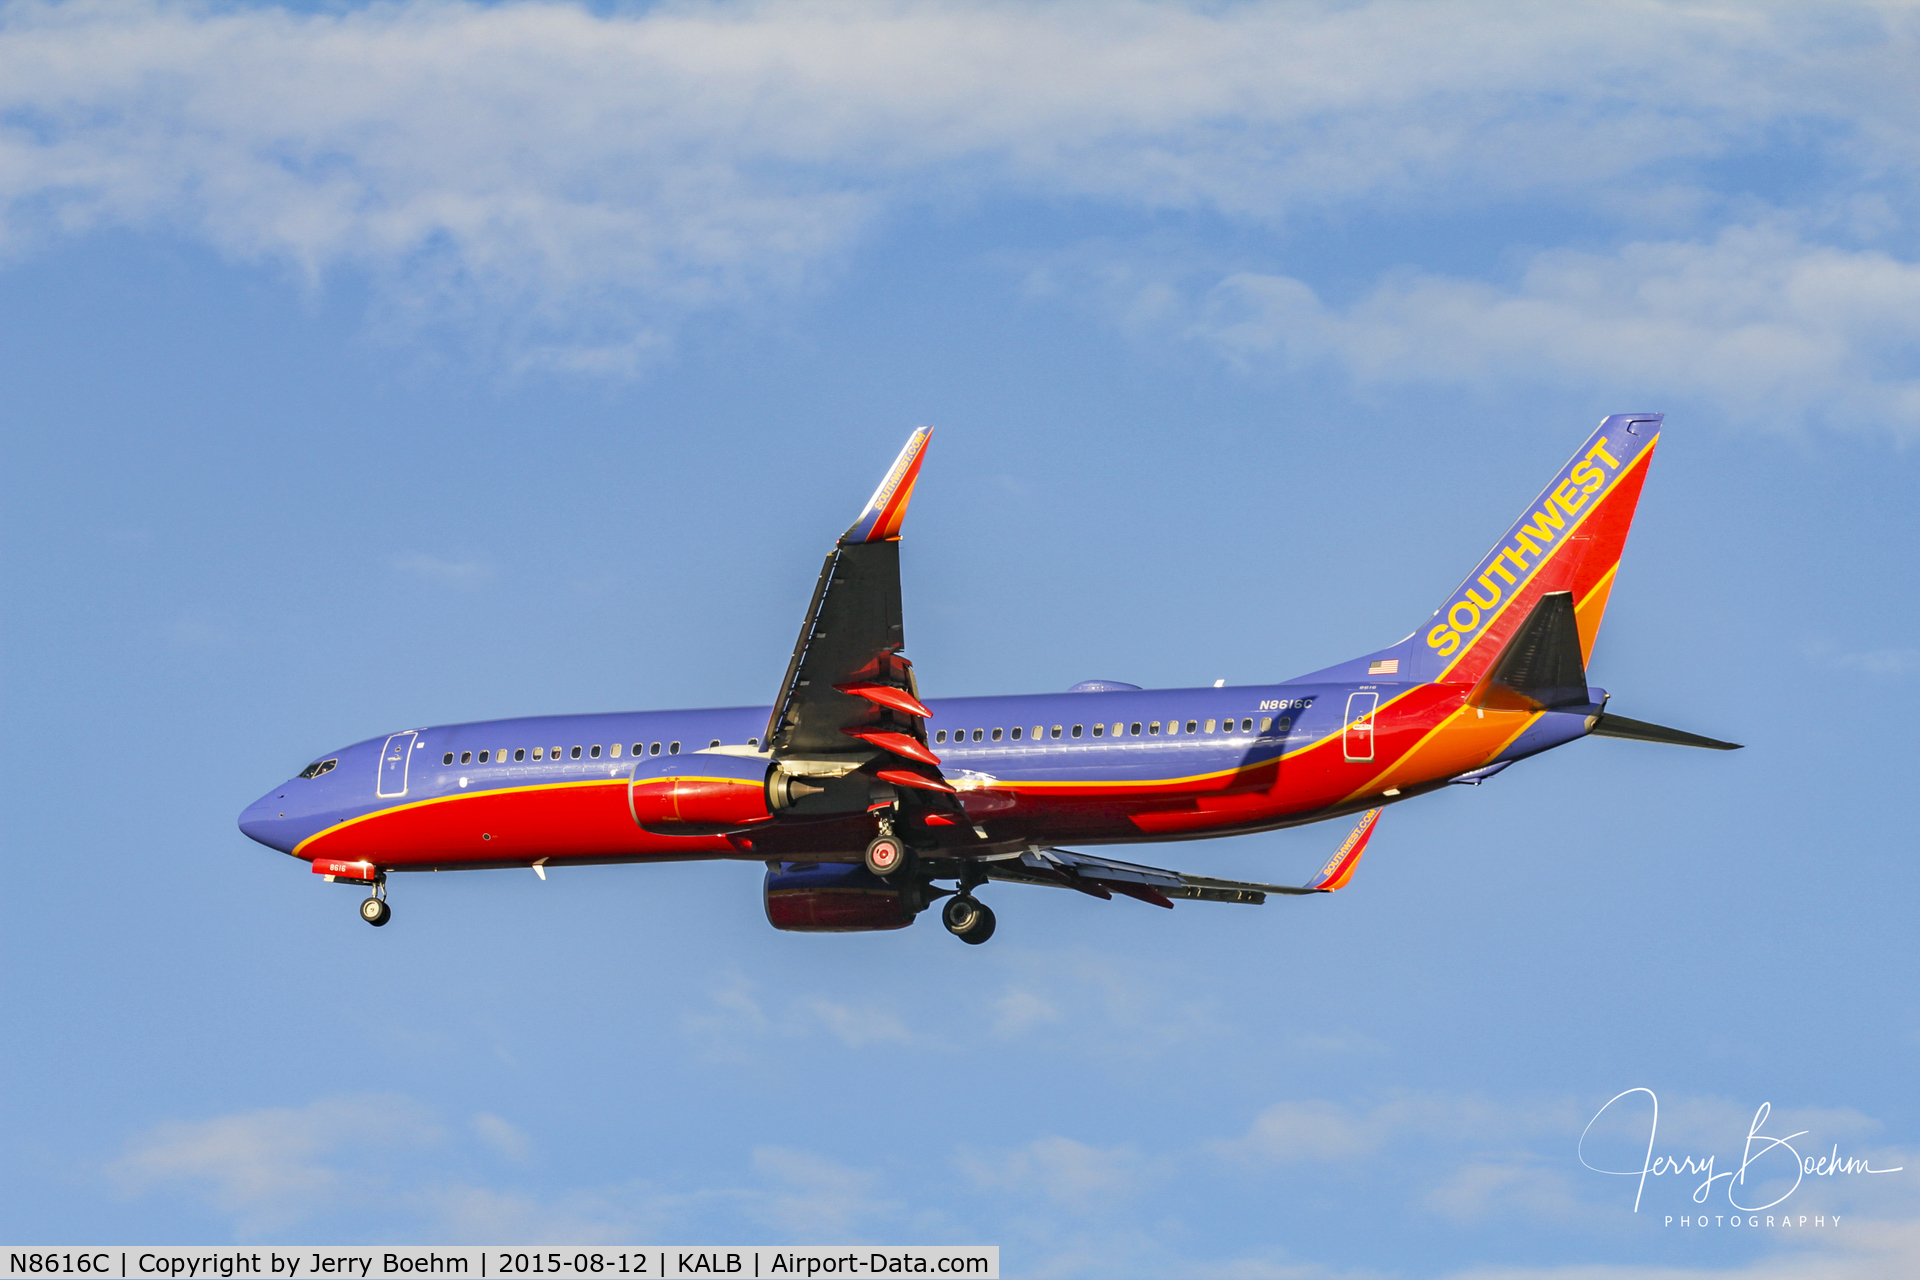 N8616C, 2013 Boeing 737-8H4 C/N 36914, Southwest commercial flight on approach to KALB runway 01 at 7:11 pm